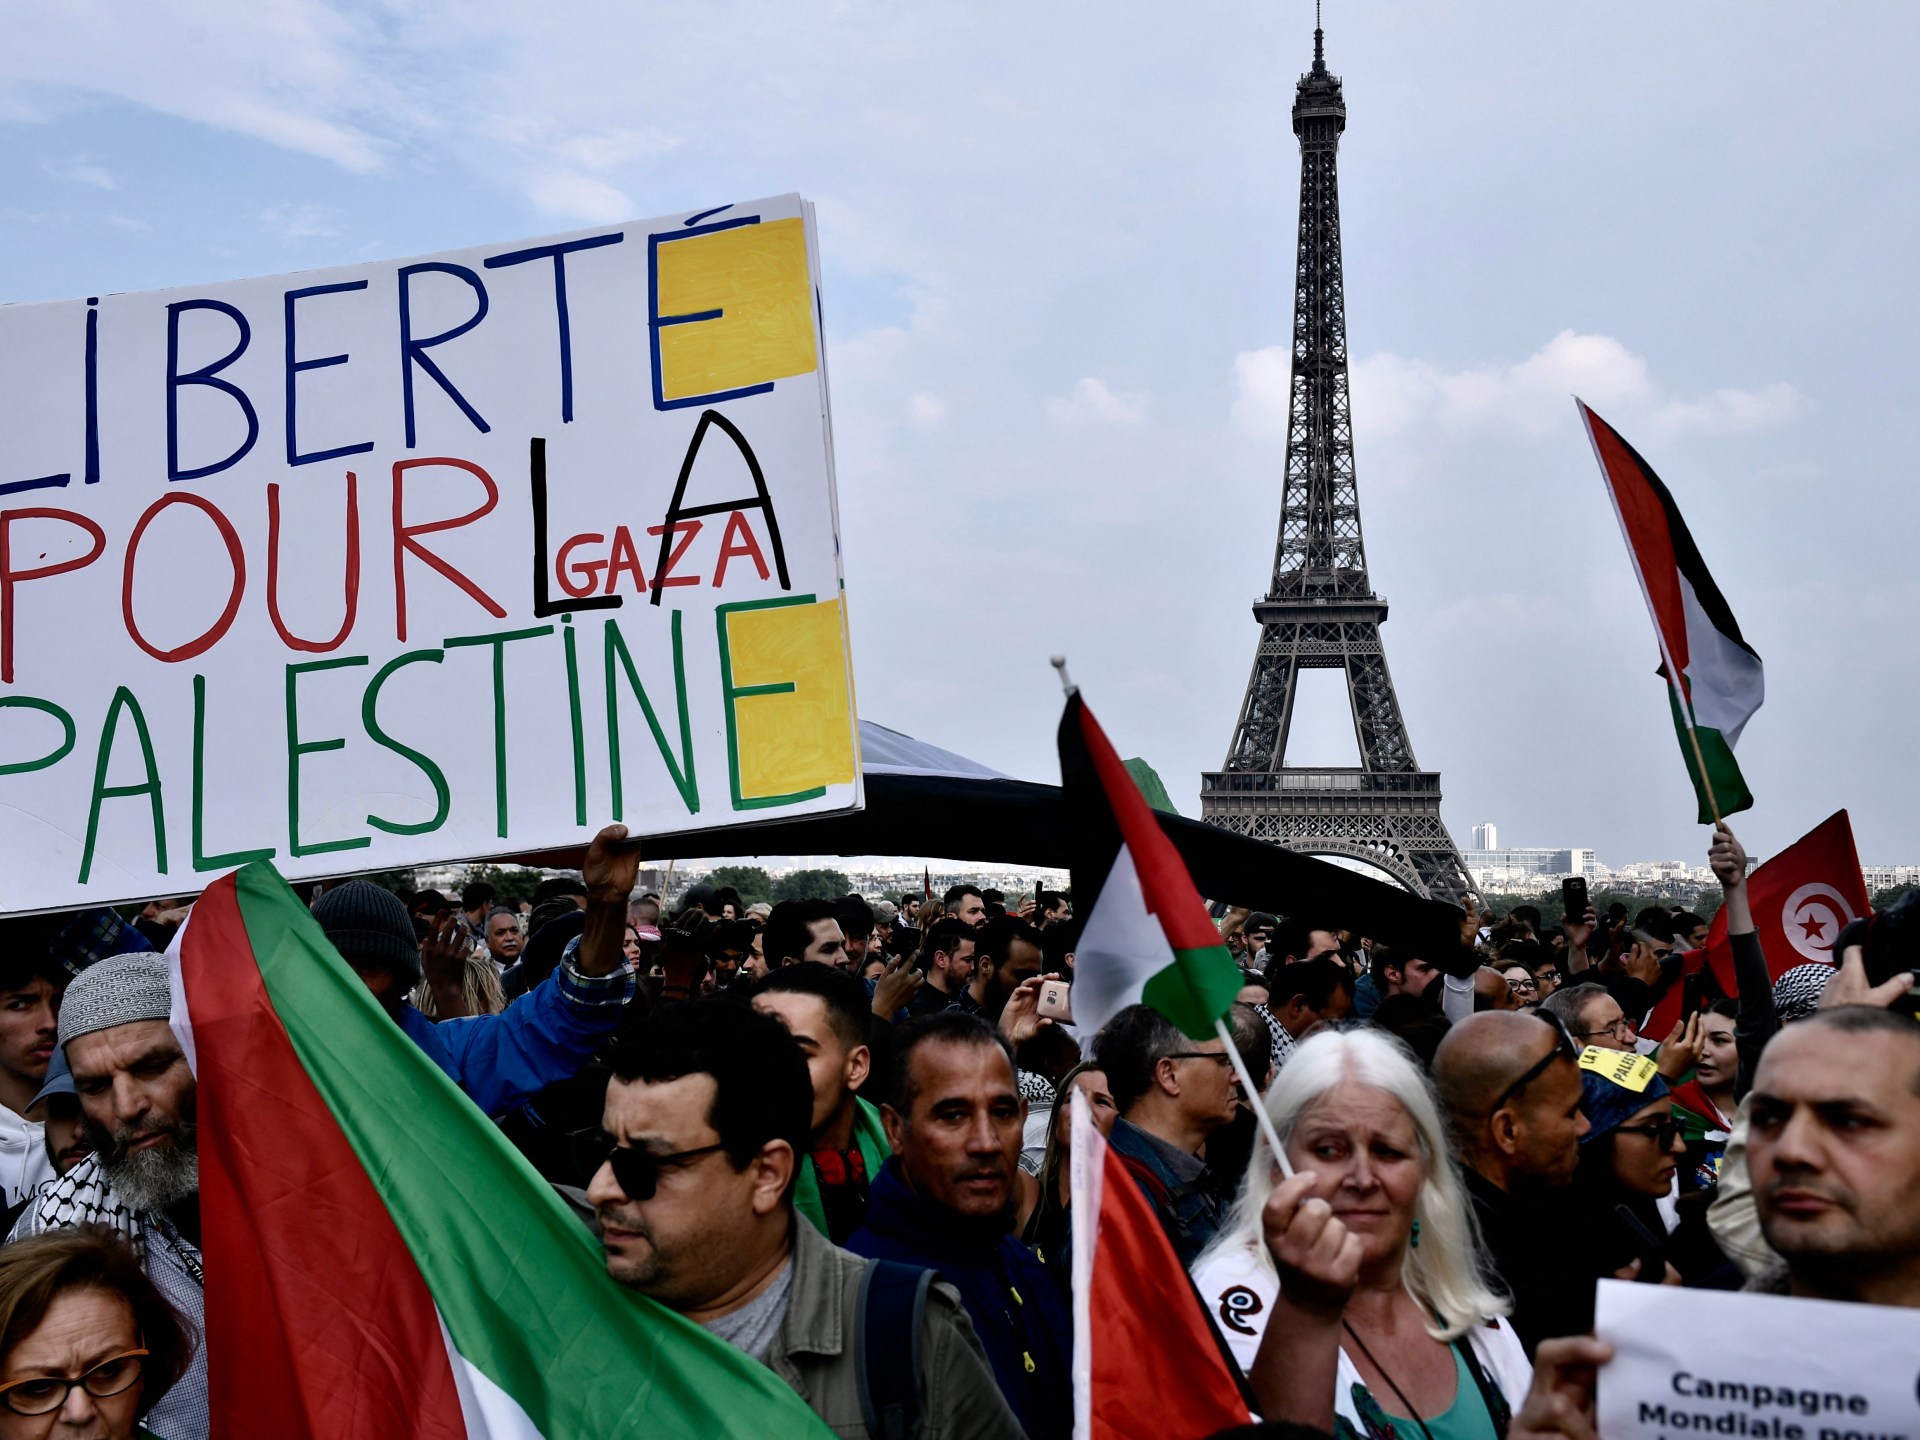 Support for Palestine in France Criminal offense punishable by imprisonment